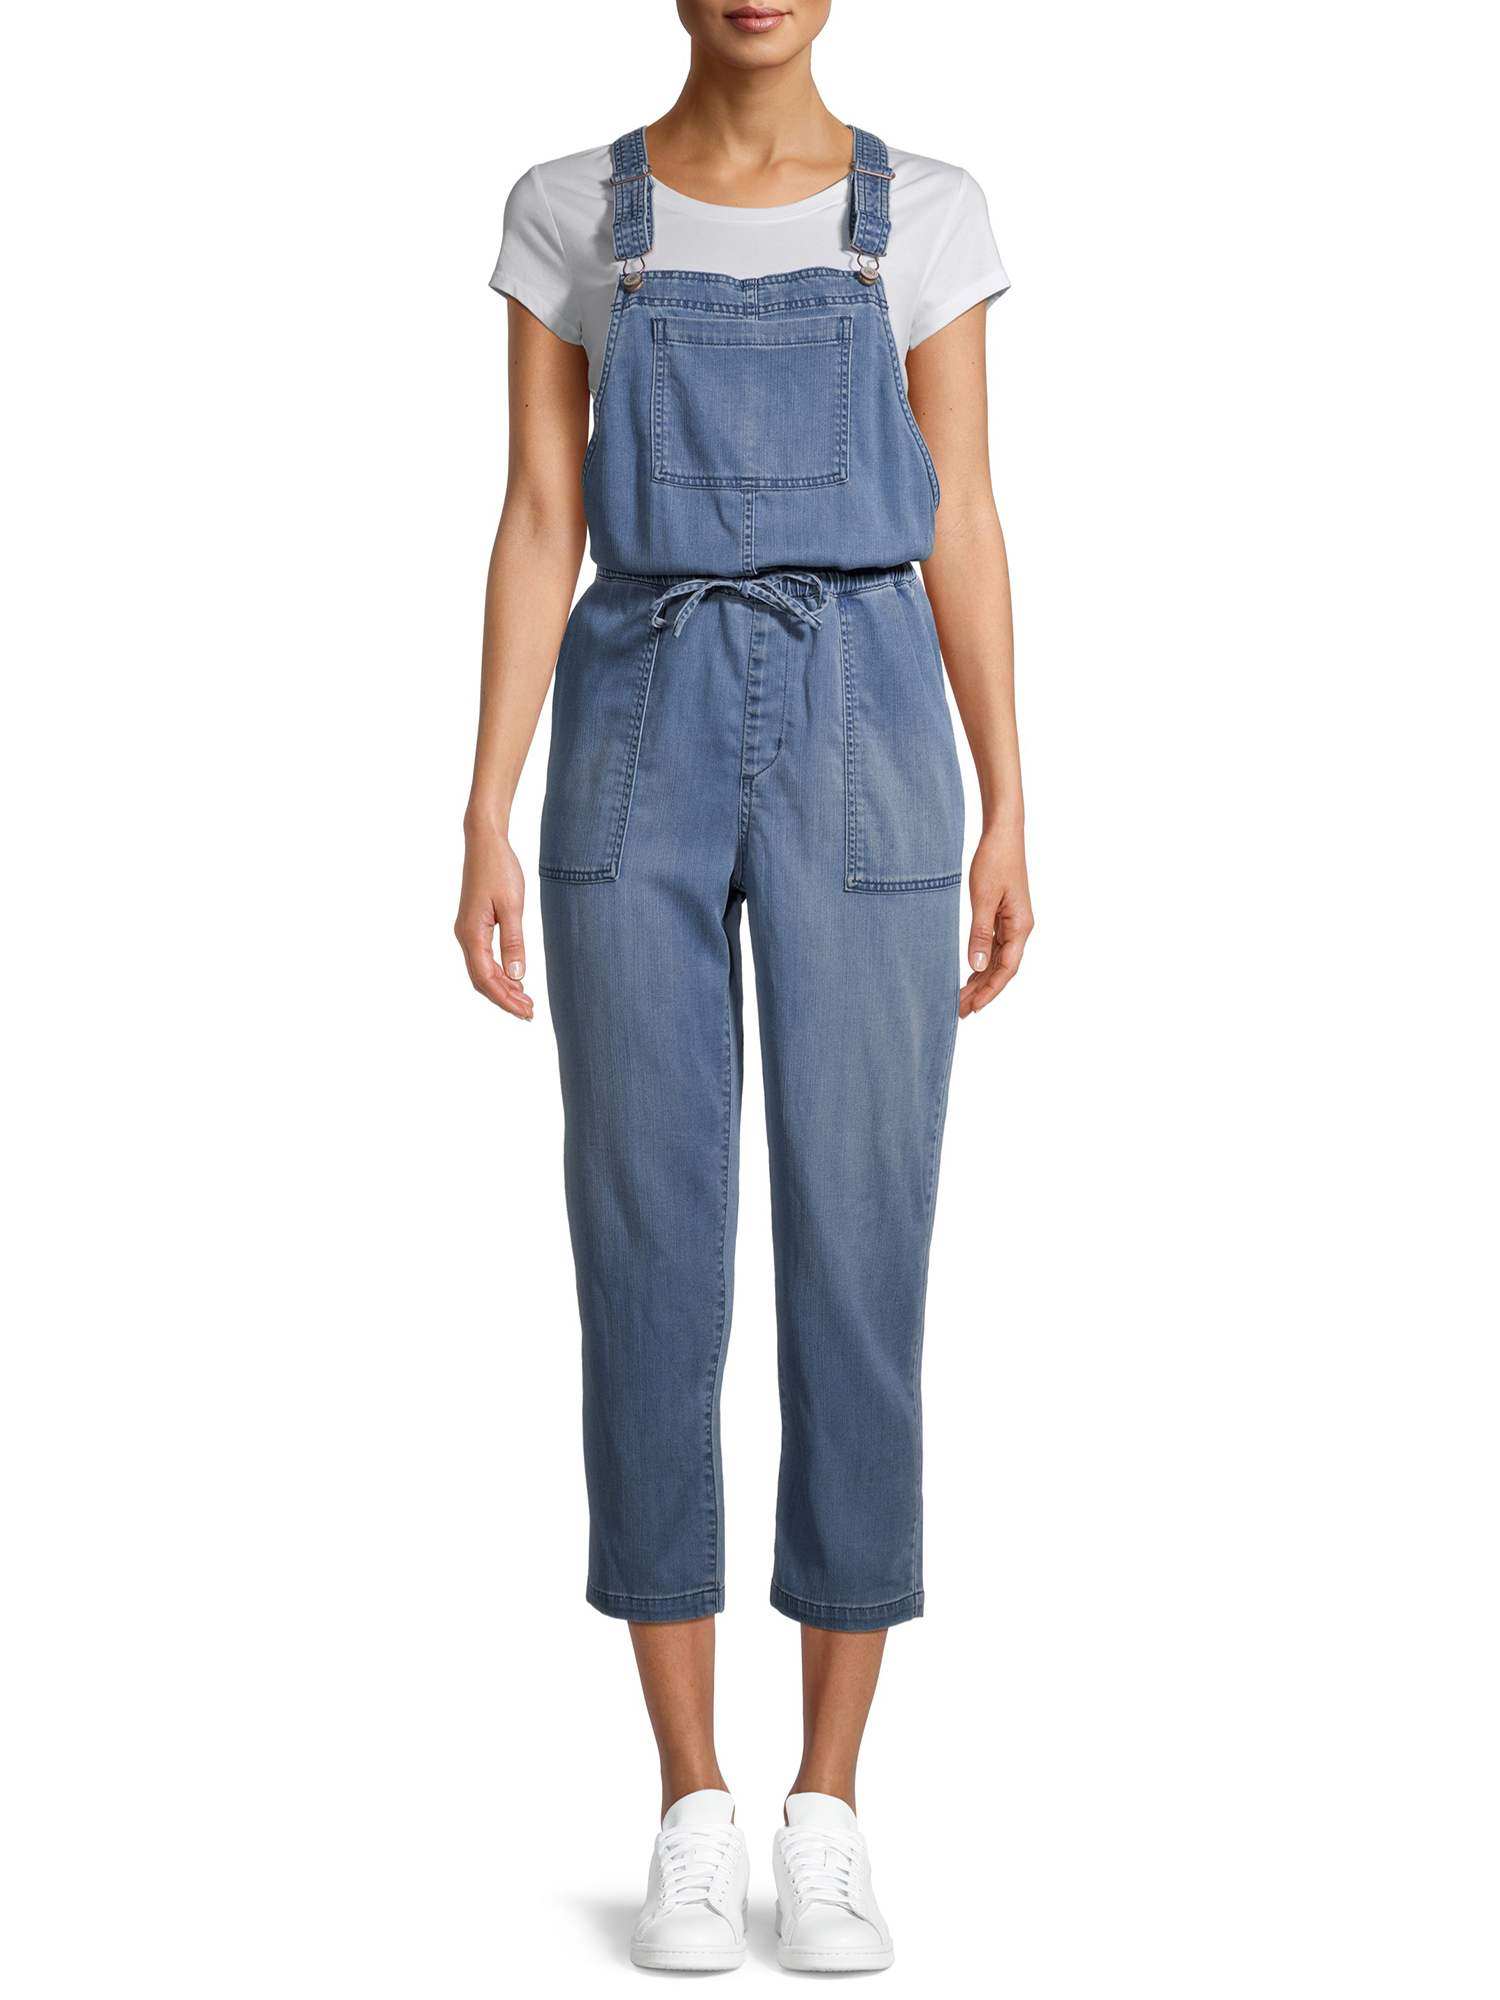 Time and Tru Women's Lightweight Soft Overalls - image 1 of 6